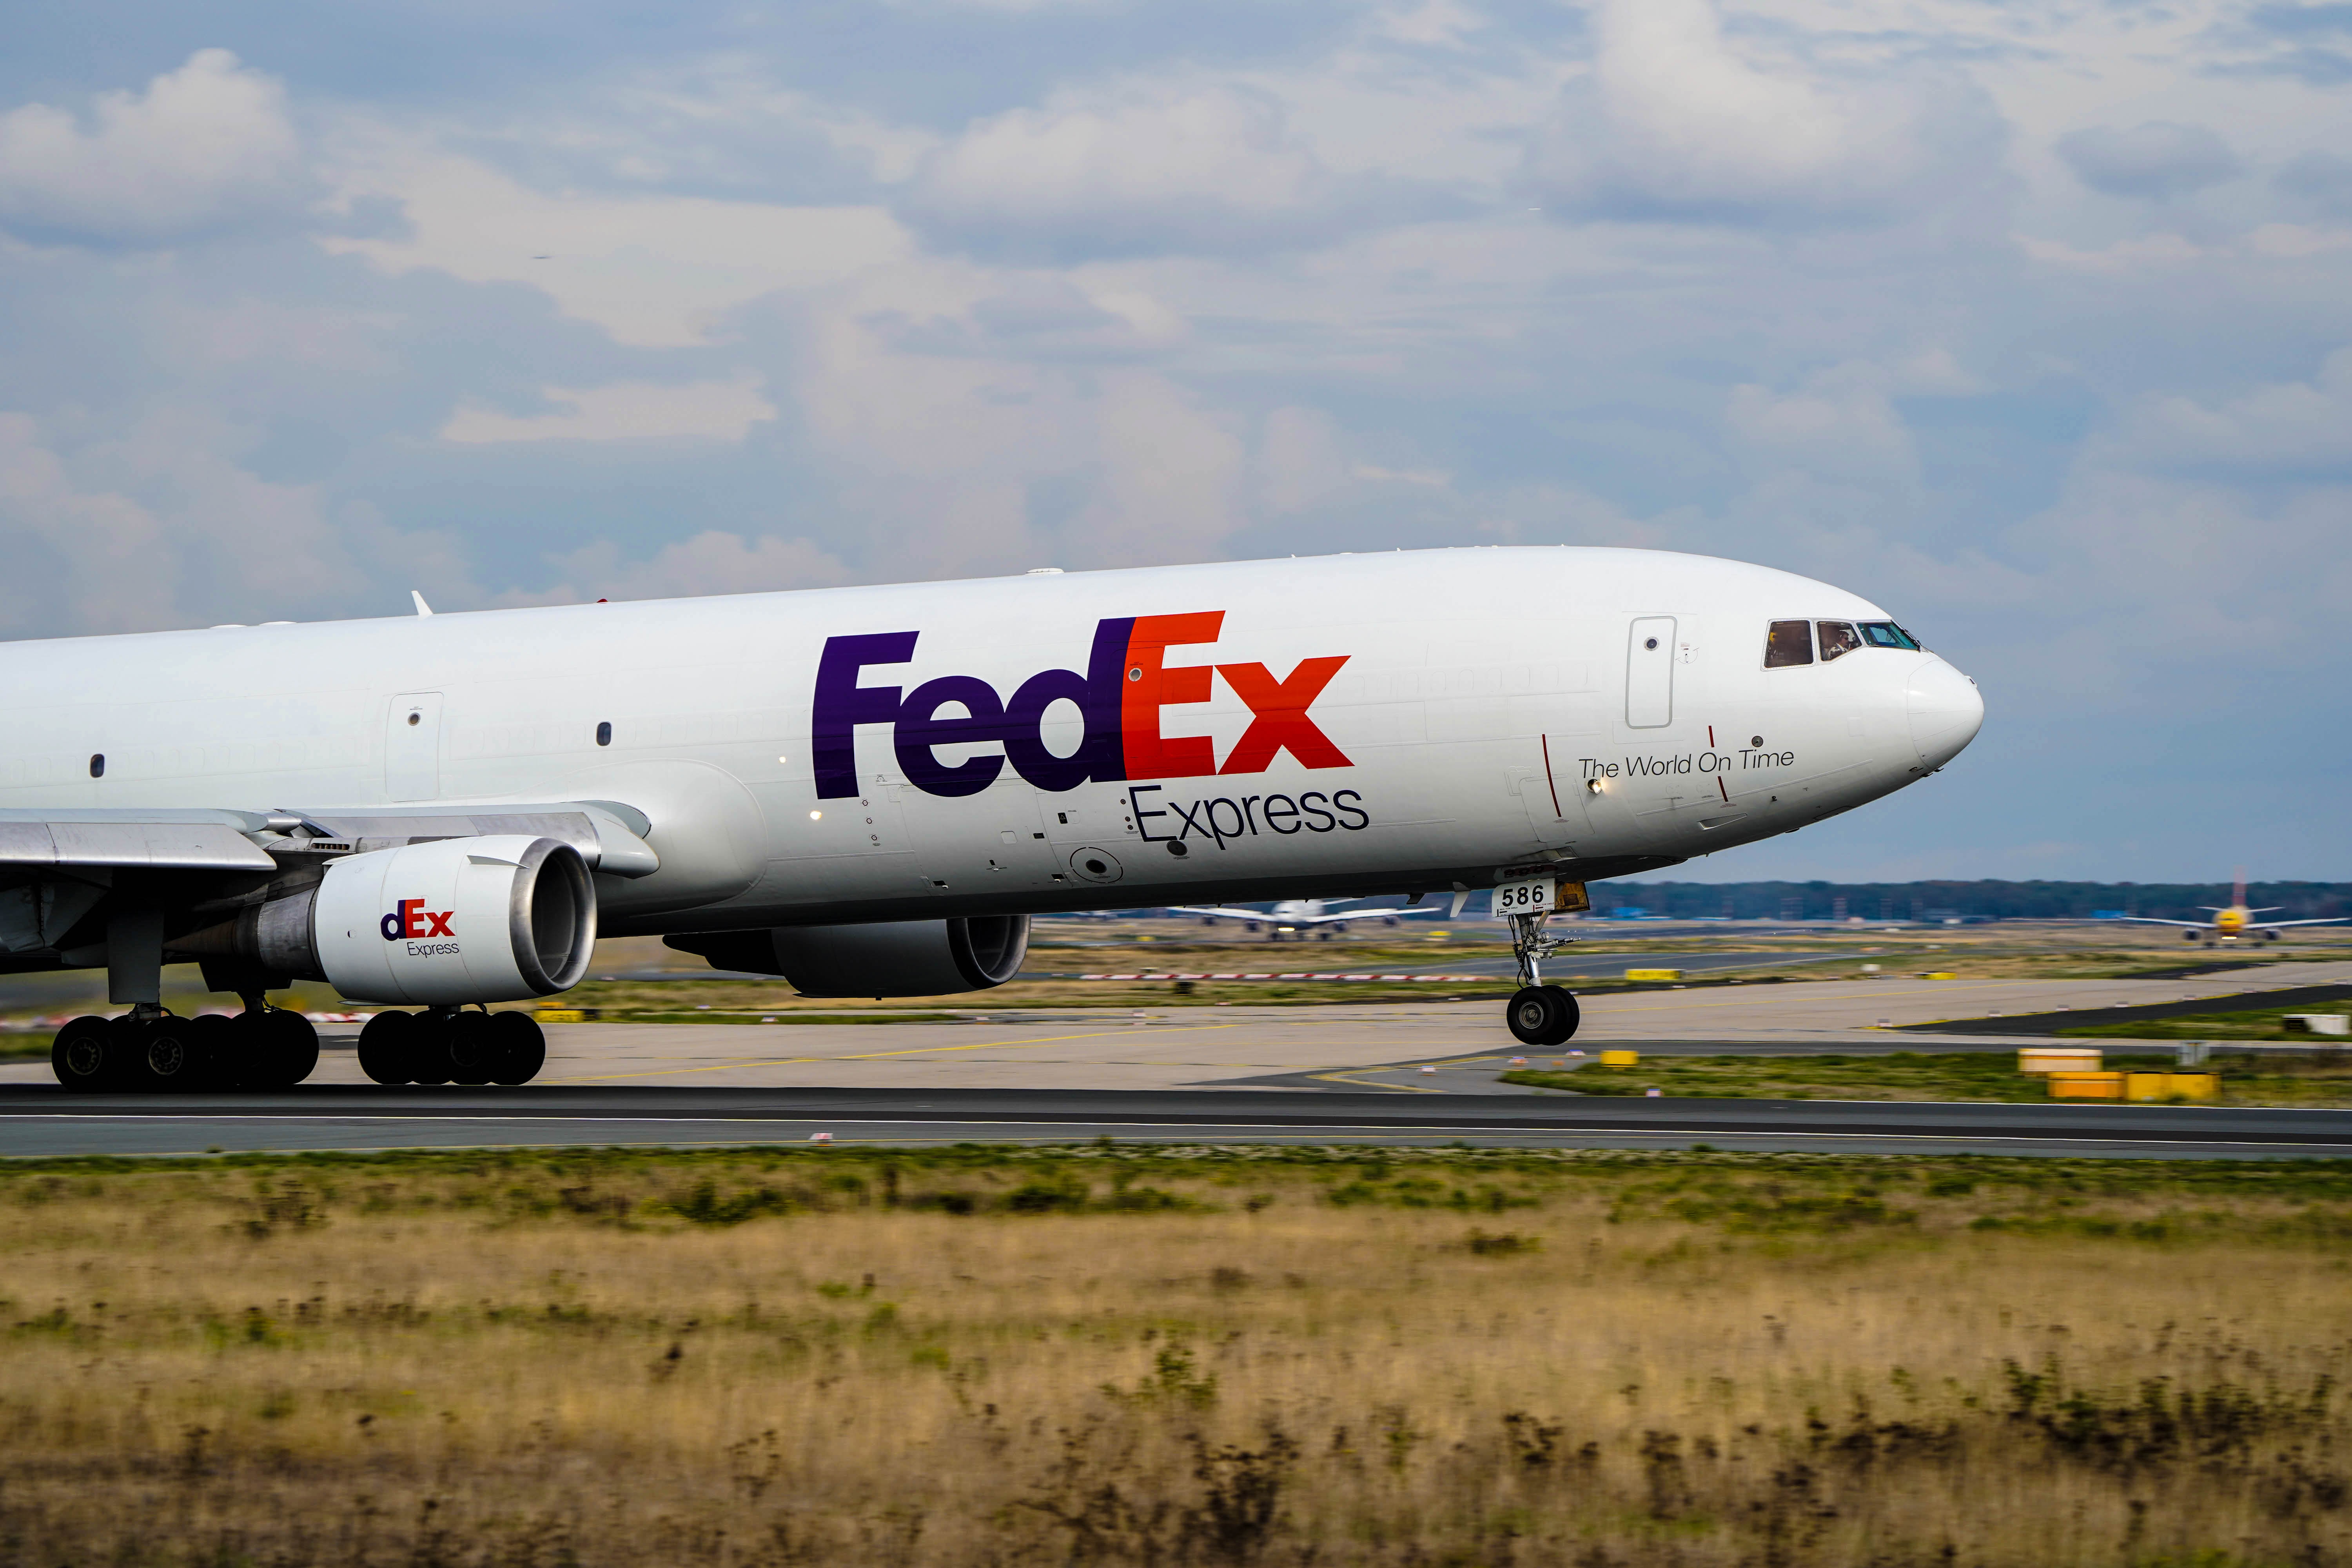 The world’s delivery service: FedEx